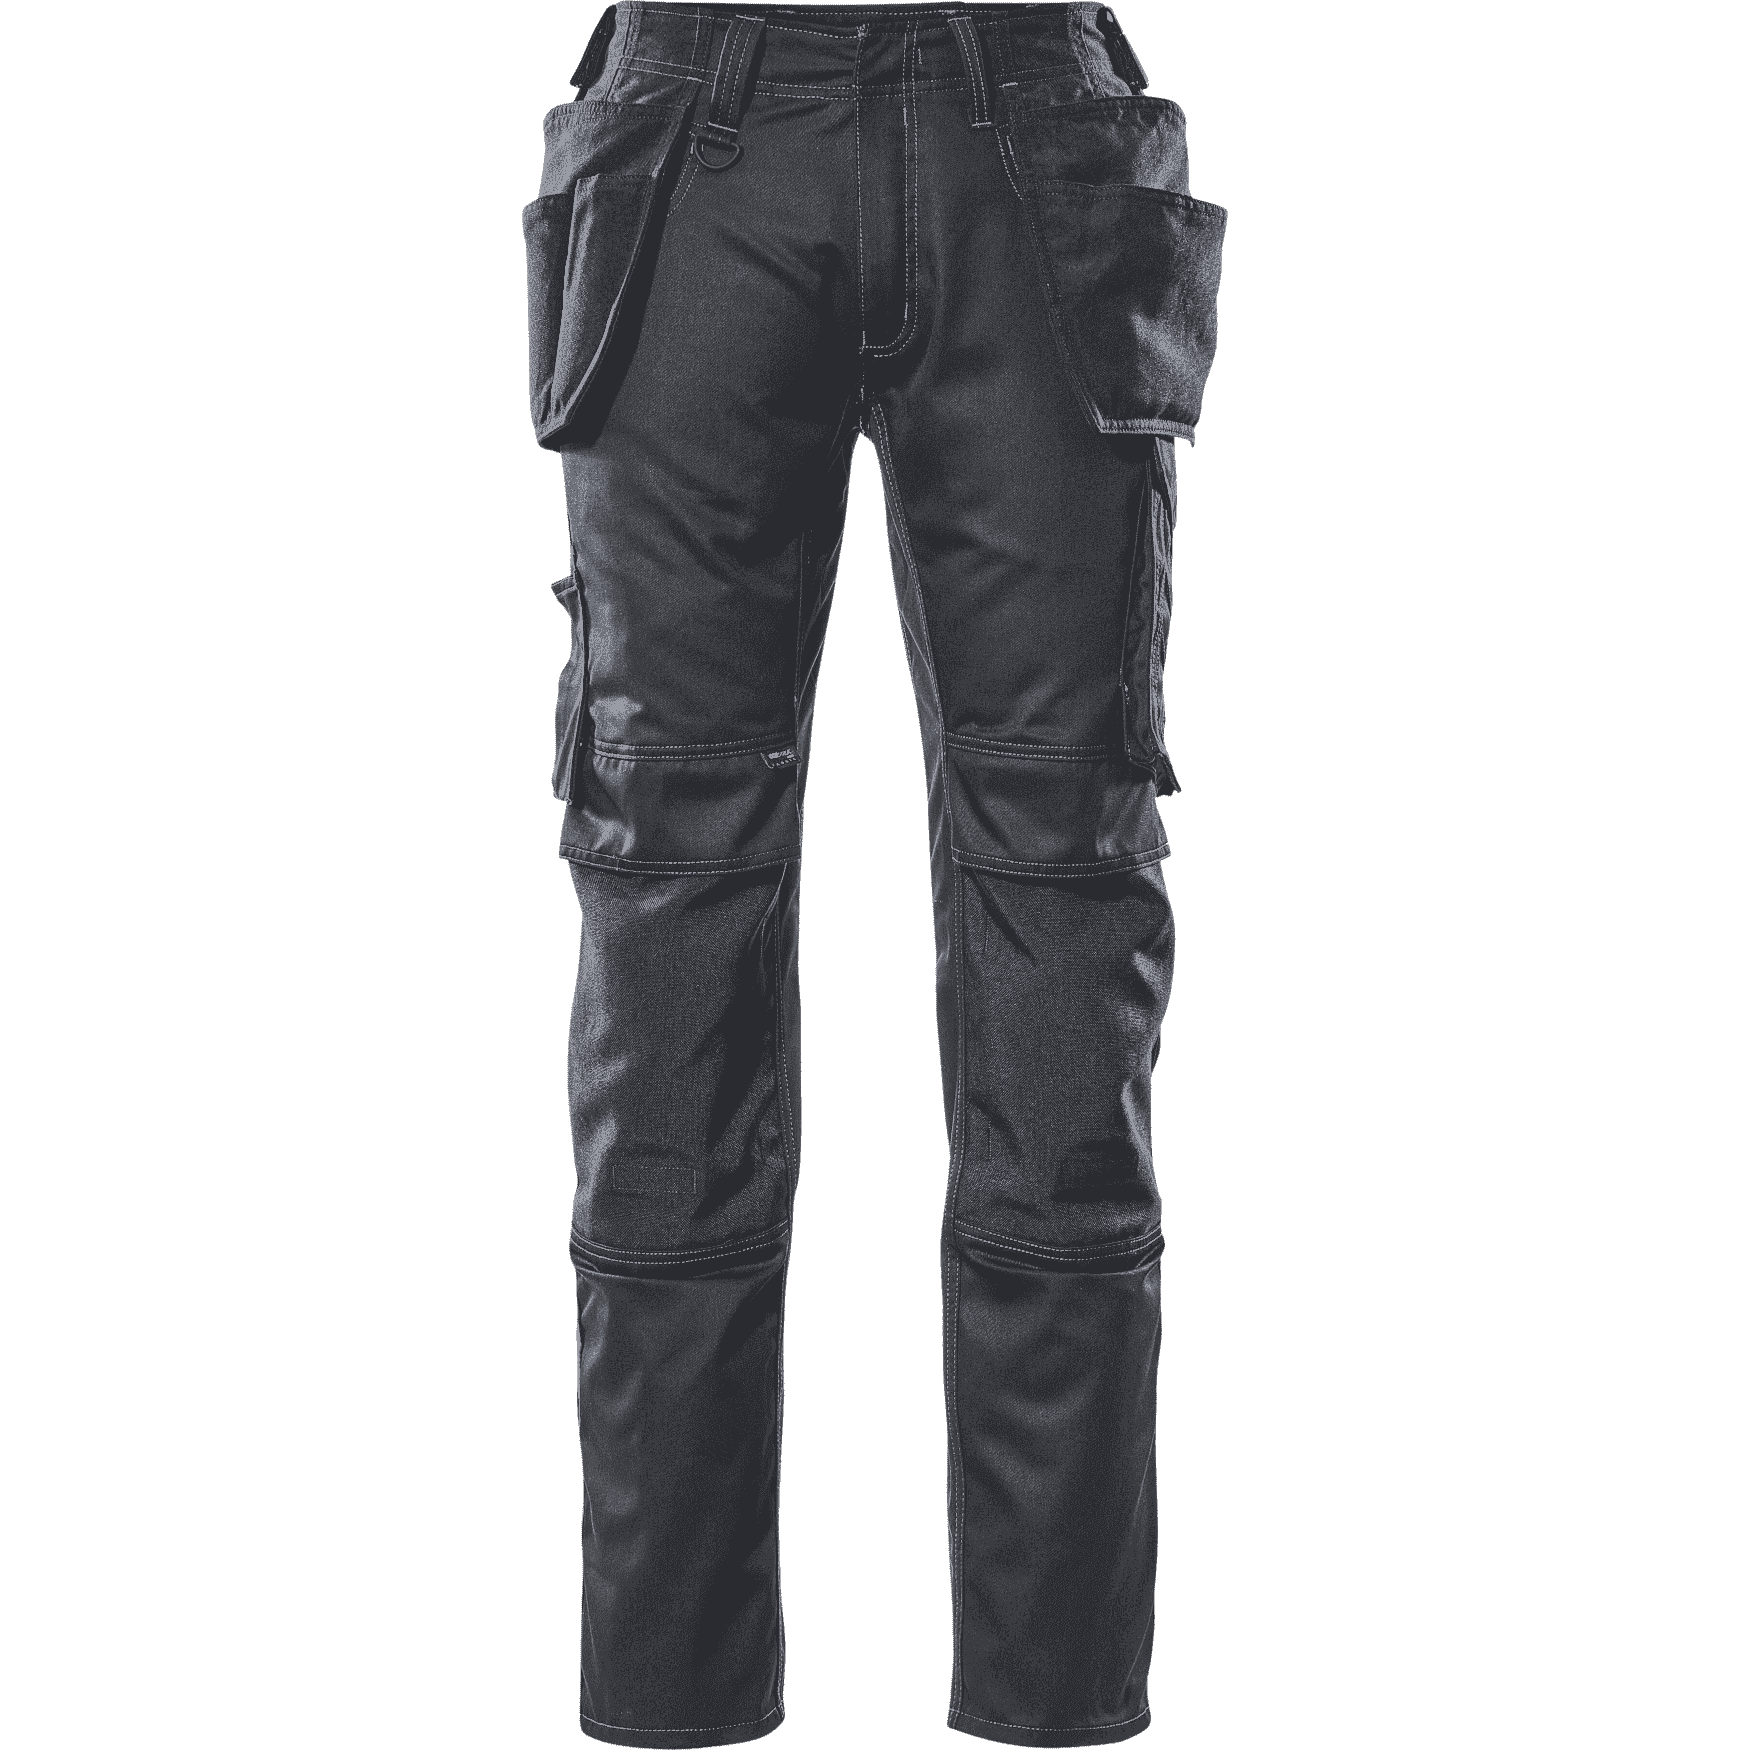 Work Trousers with Holster Pockets 17731-442 Black